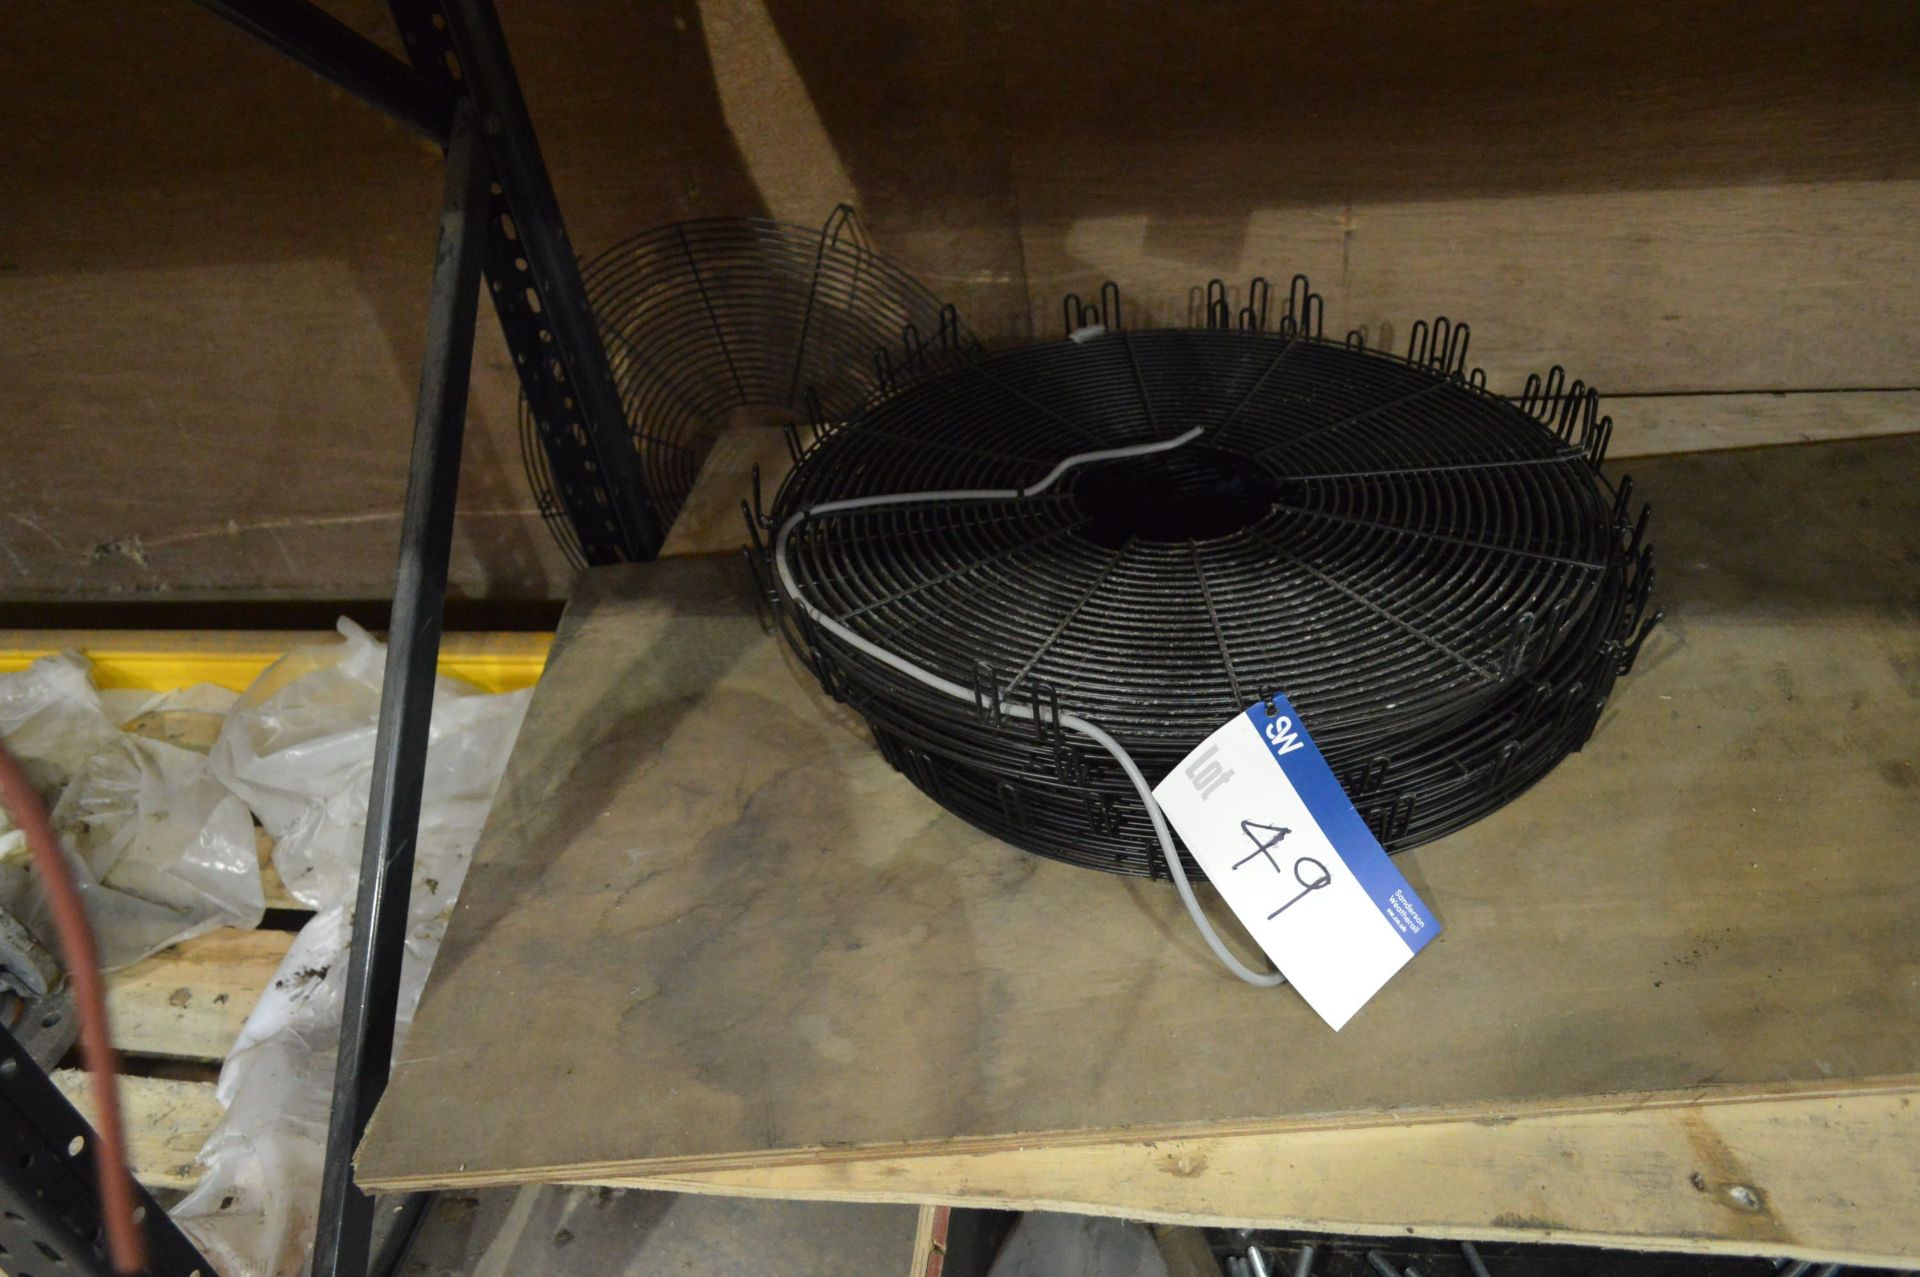 Fan Guards and Equipment, in box pallet